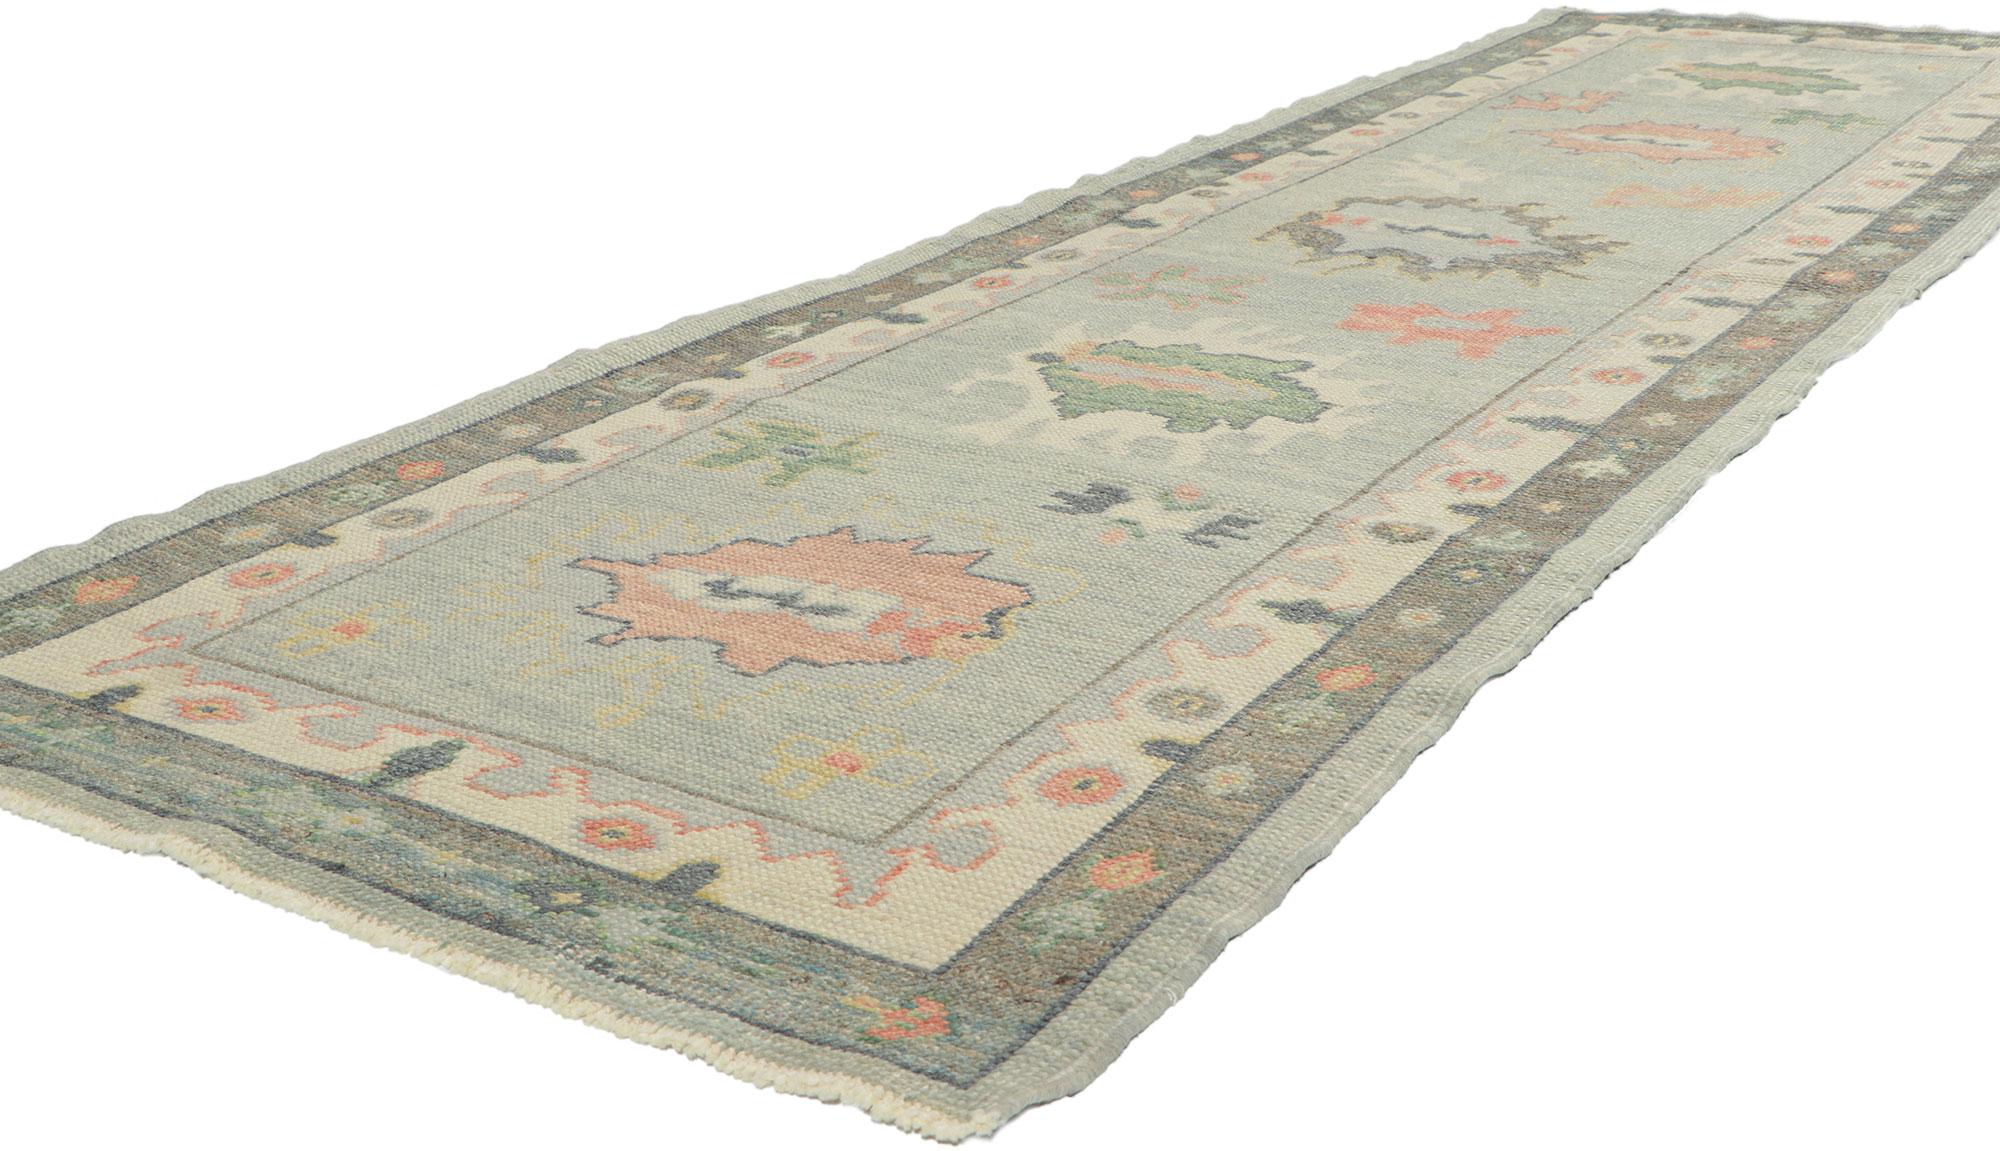 53814 New Contemporary Turkish oushak hallway runner with modern style 03'00 x 10'03.? This hand-knotted wool contemporary Turkish Oushak runner features an all-over botanical pattern composed of amorphous organic motifs spread across an abrashed